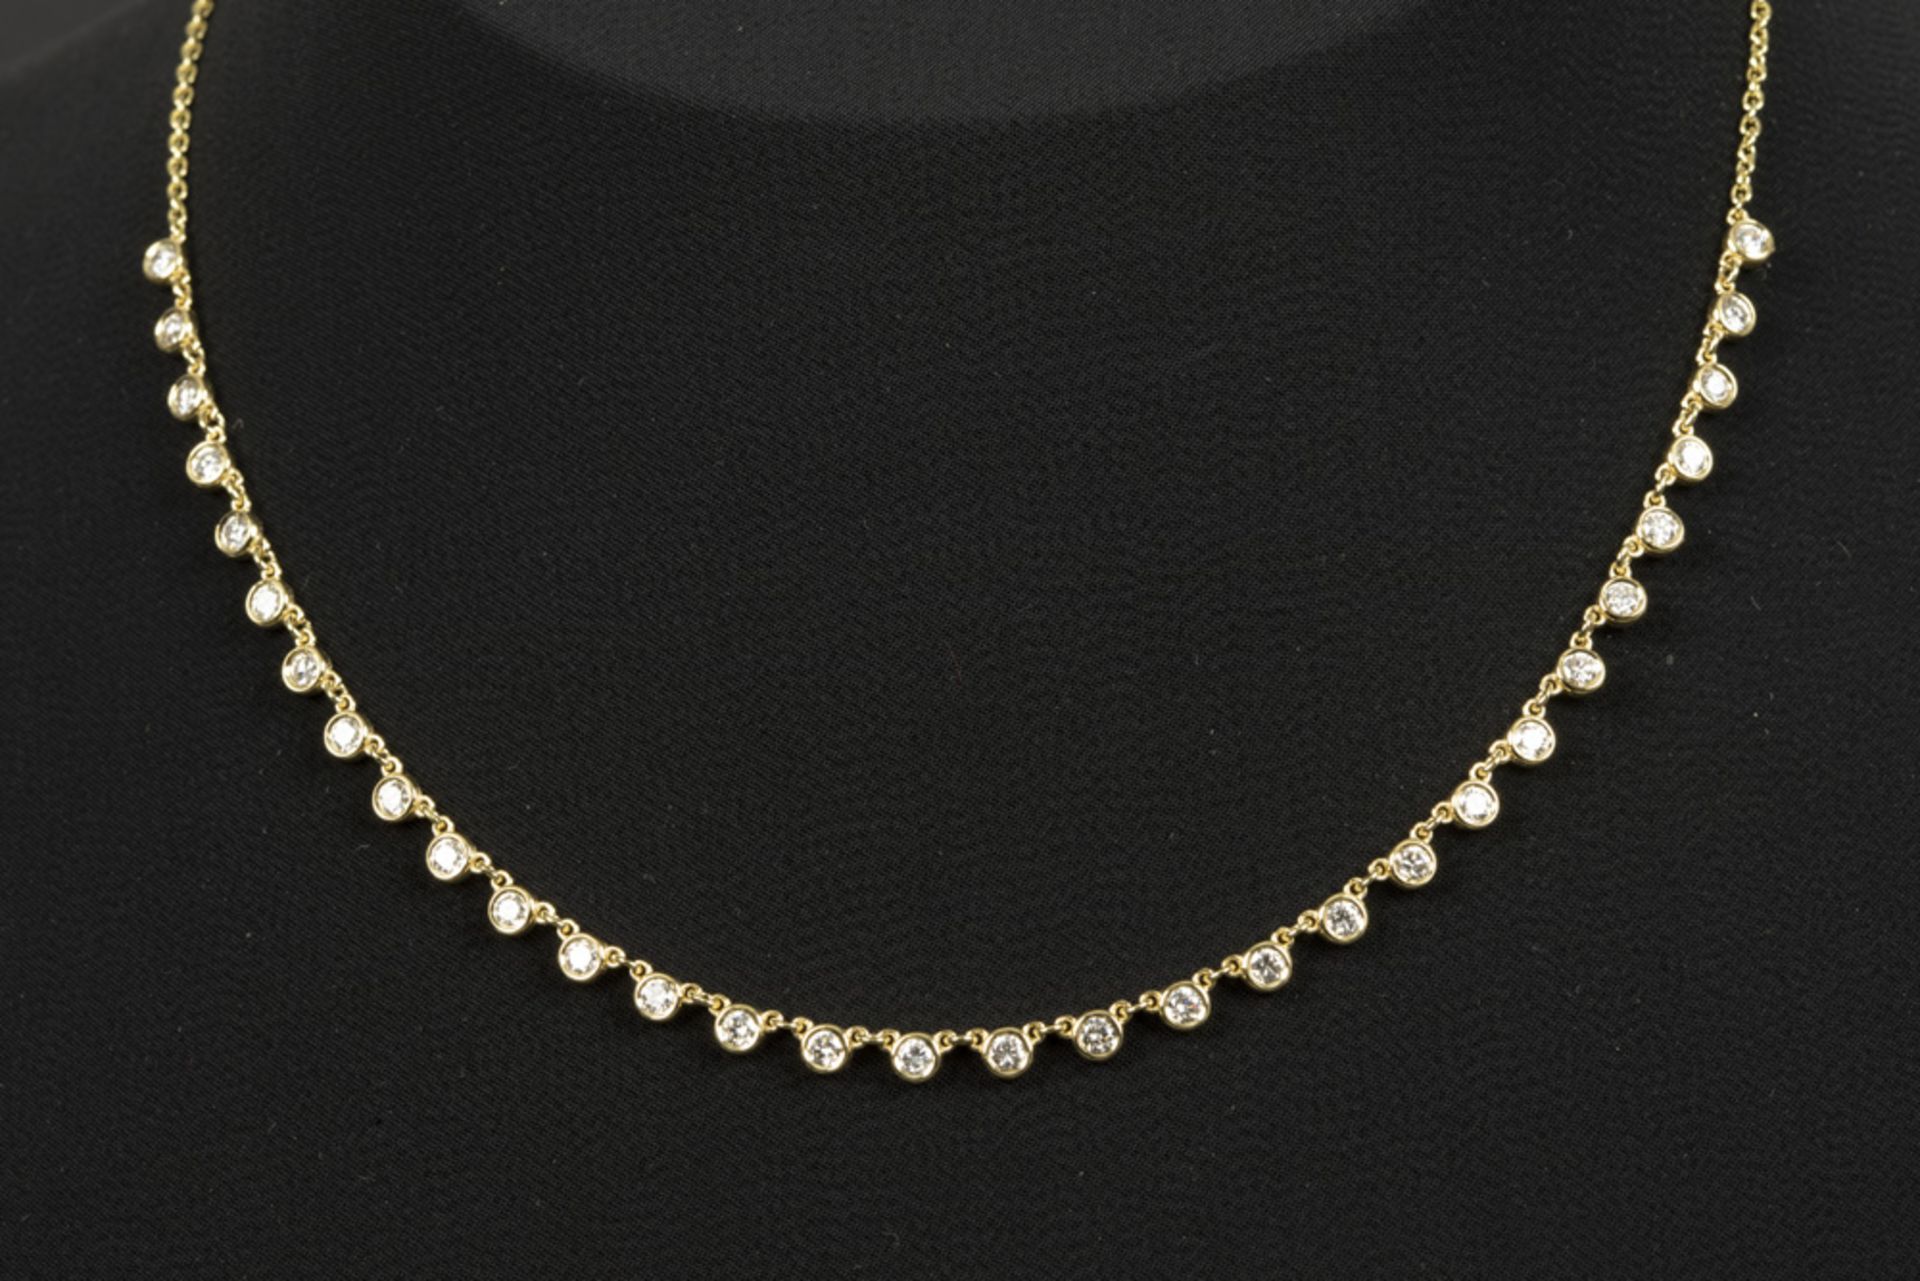 necklace in yellow gold (18 carat) with more then 1,40 carat of very high quality brilliant cut